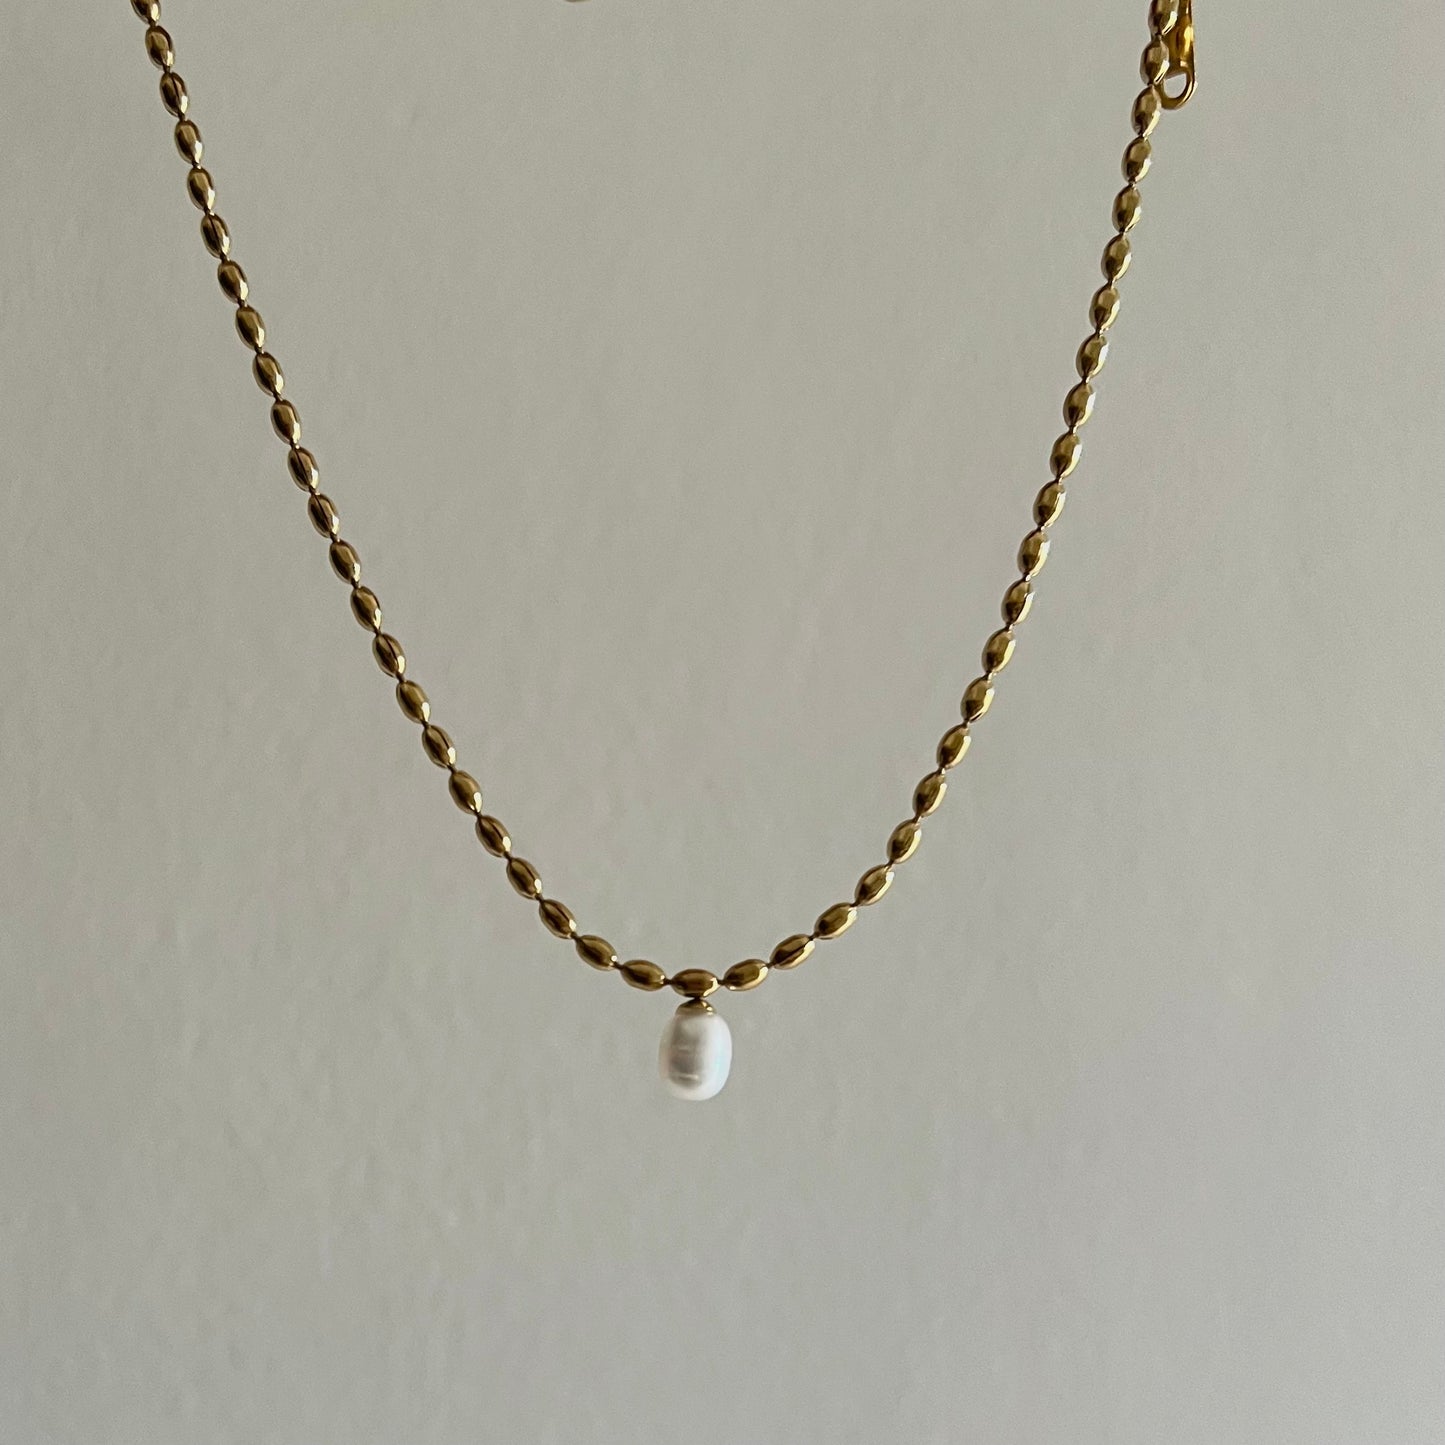 18KT Gold Plated Beaded Necklace with Pearl Charm